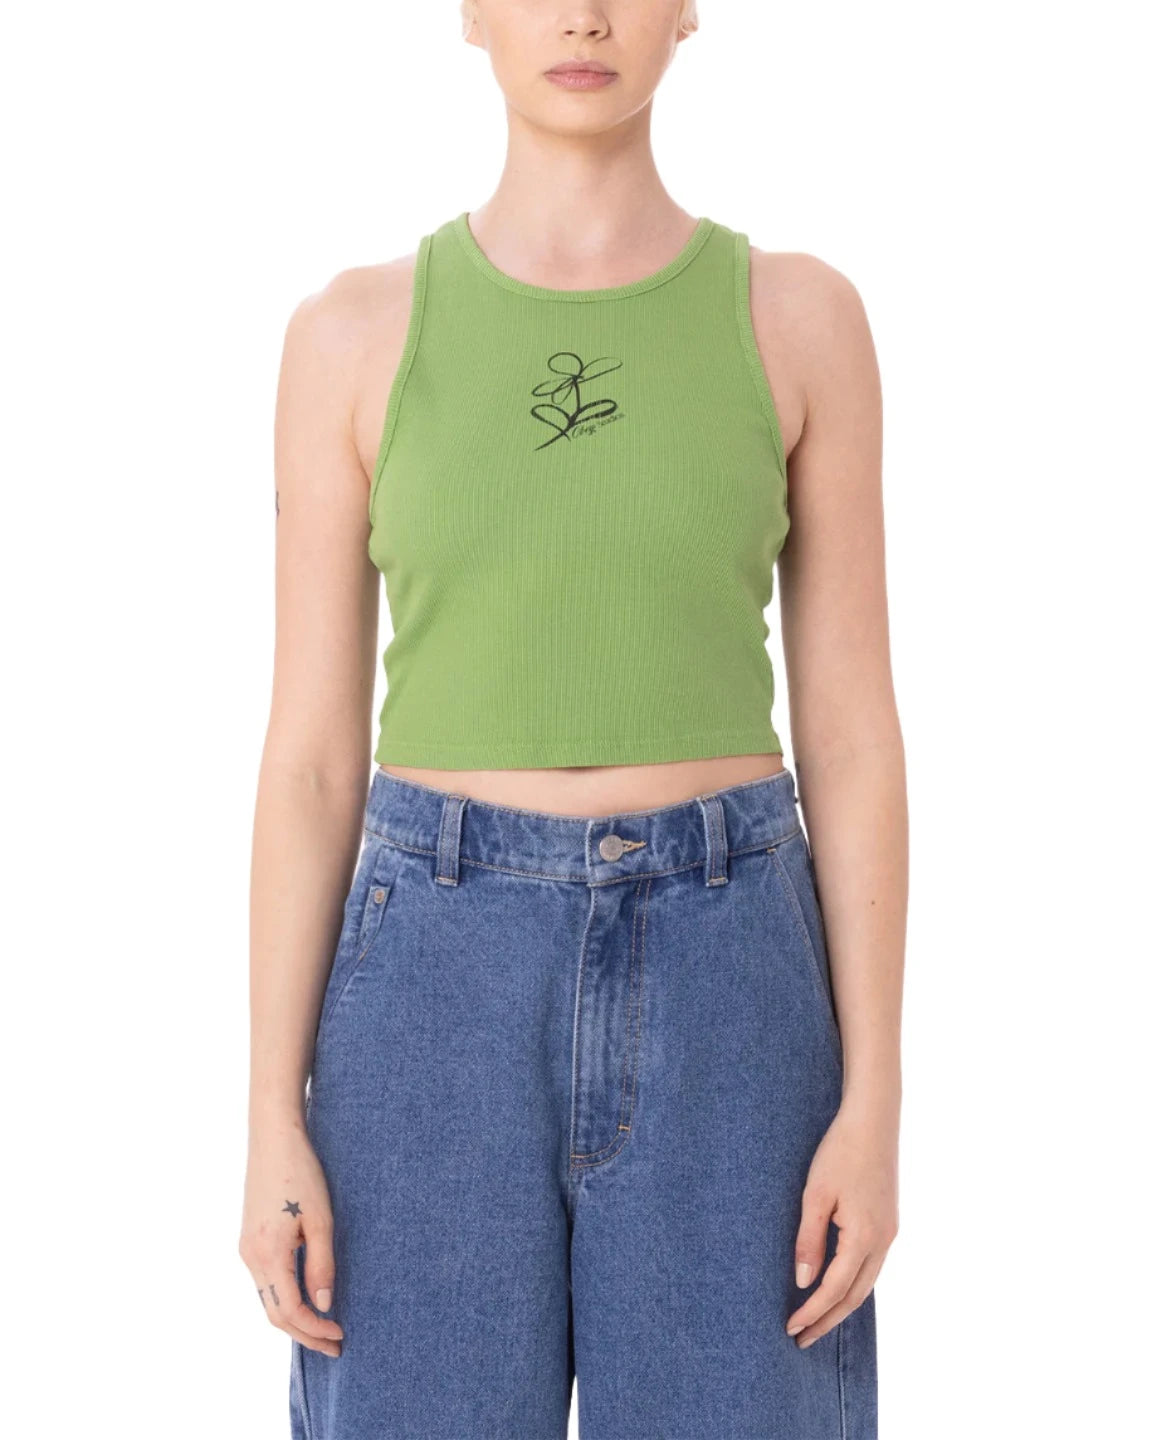 OBEY Women's Sharpie Flower Doodle Rib Tank Piquant Green Women's Tank Tops and Halter Tops Obey 